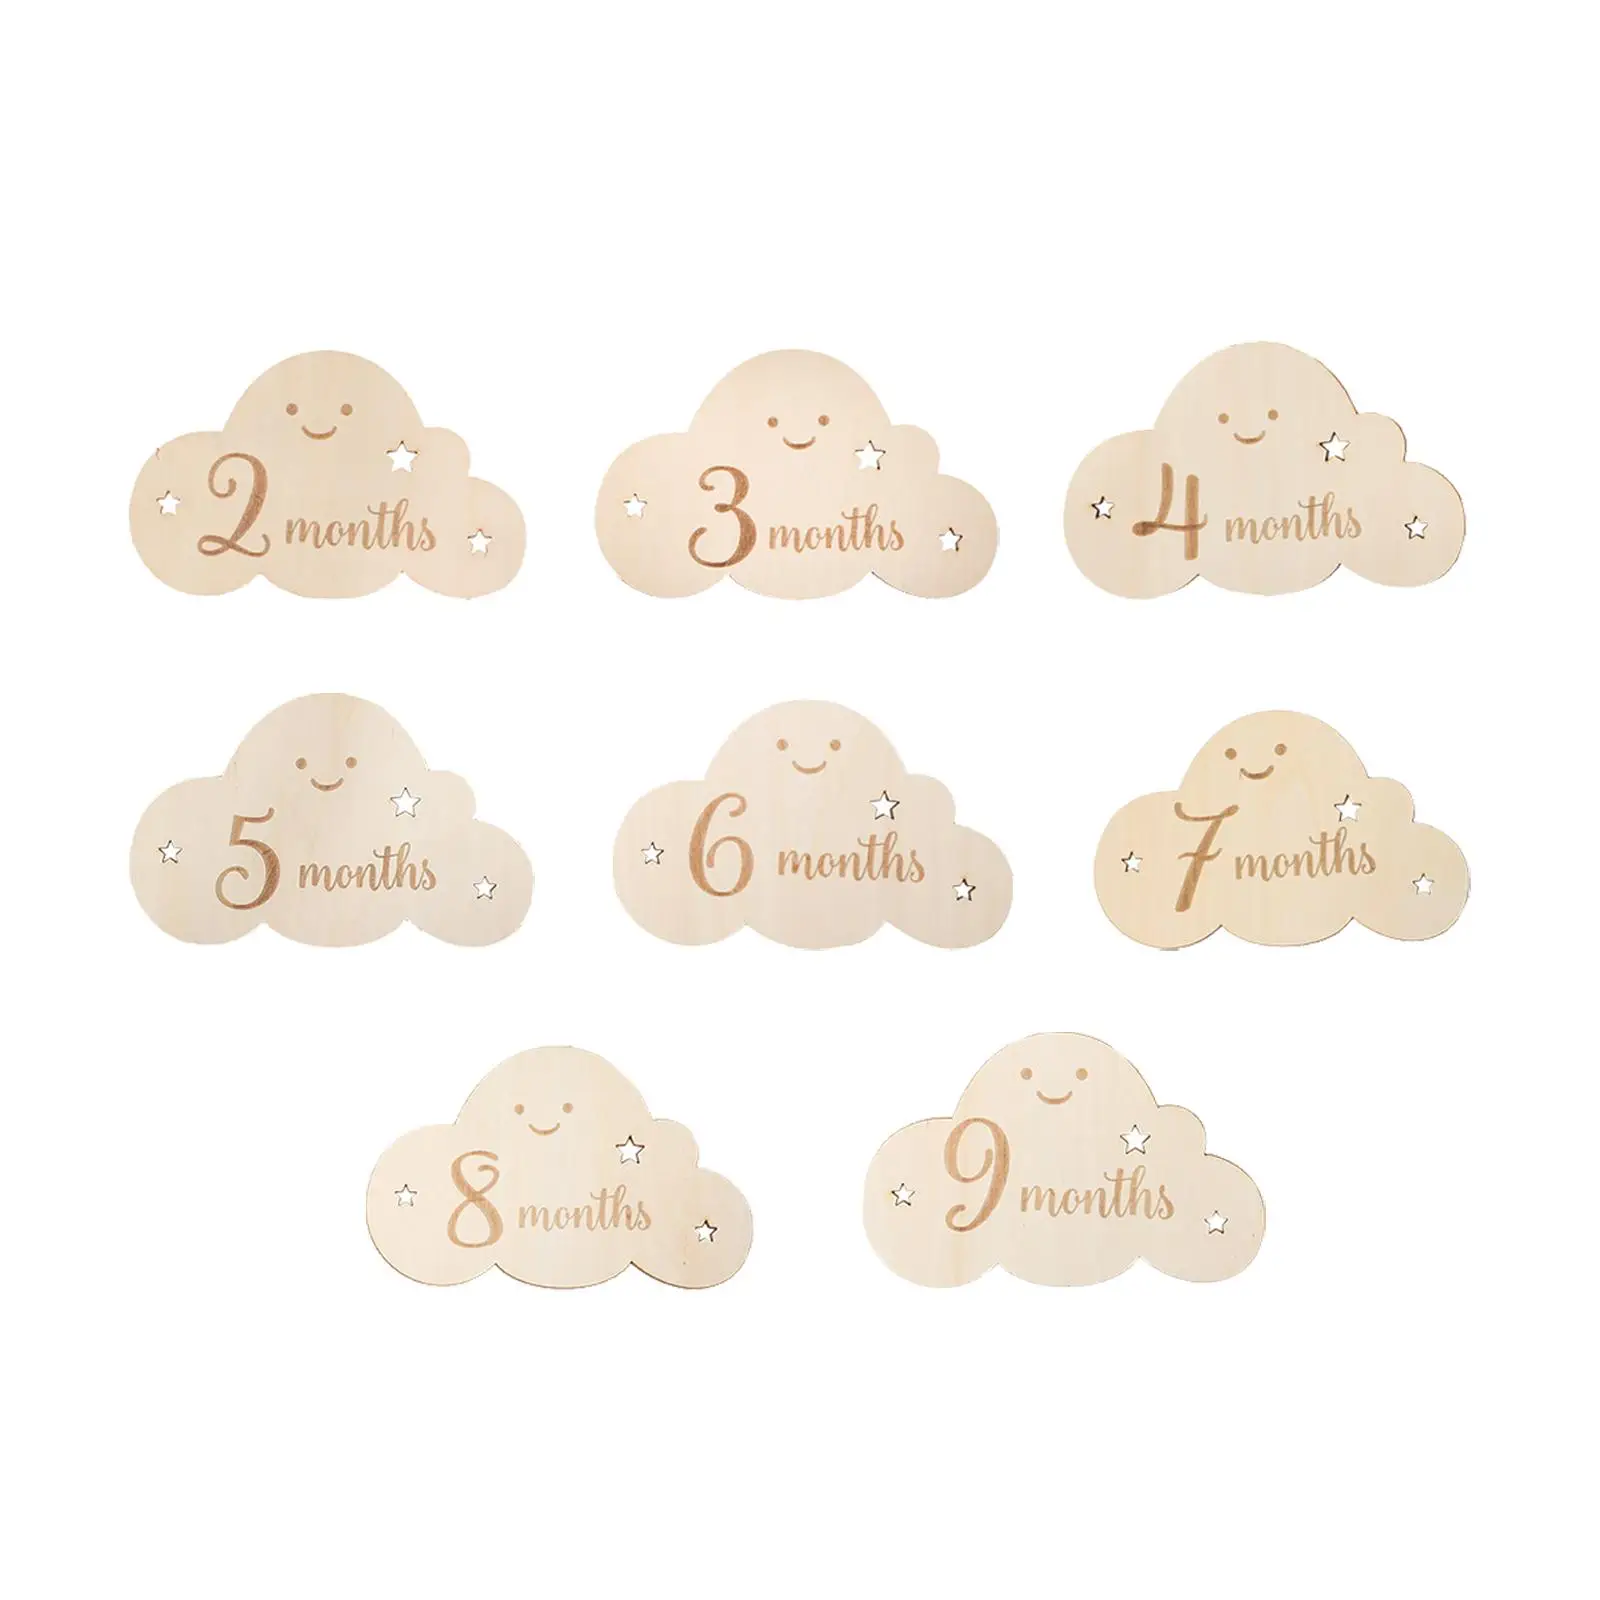 8x Wooden Baby Milestone Cards Keepsake Toy Cute Clouds Shape for Newborn to Age 1 New Mom Gifts Record Growth Monthly Stickers